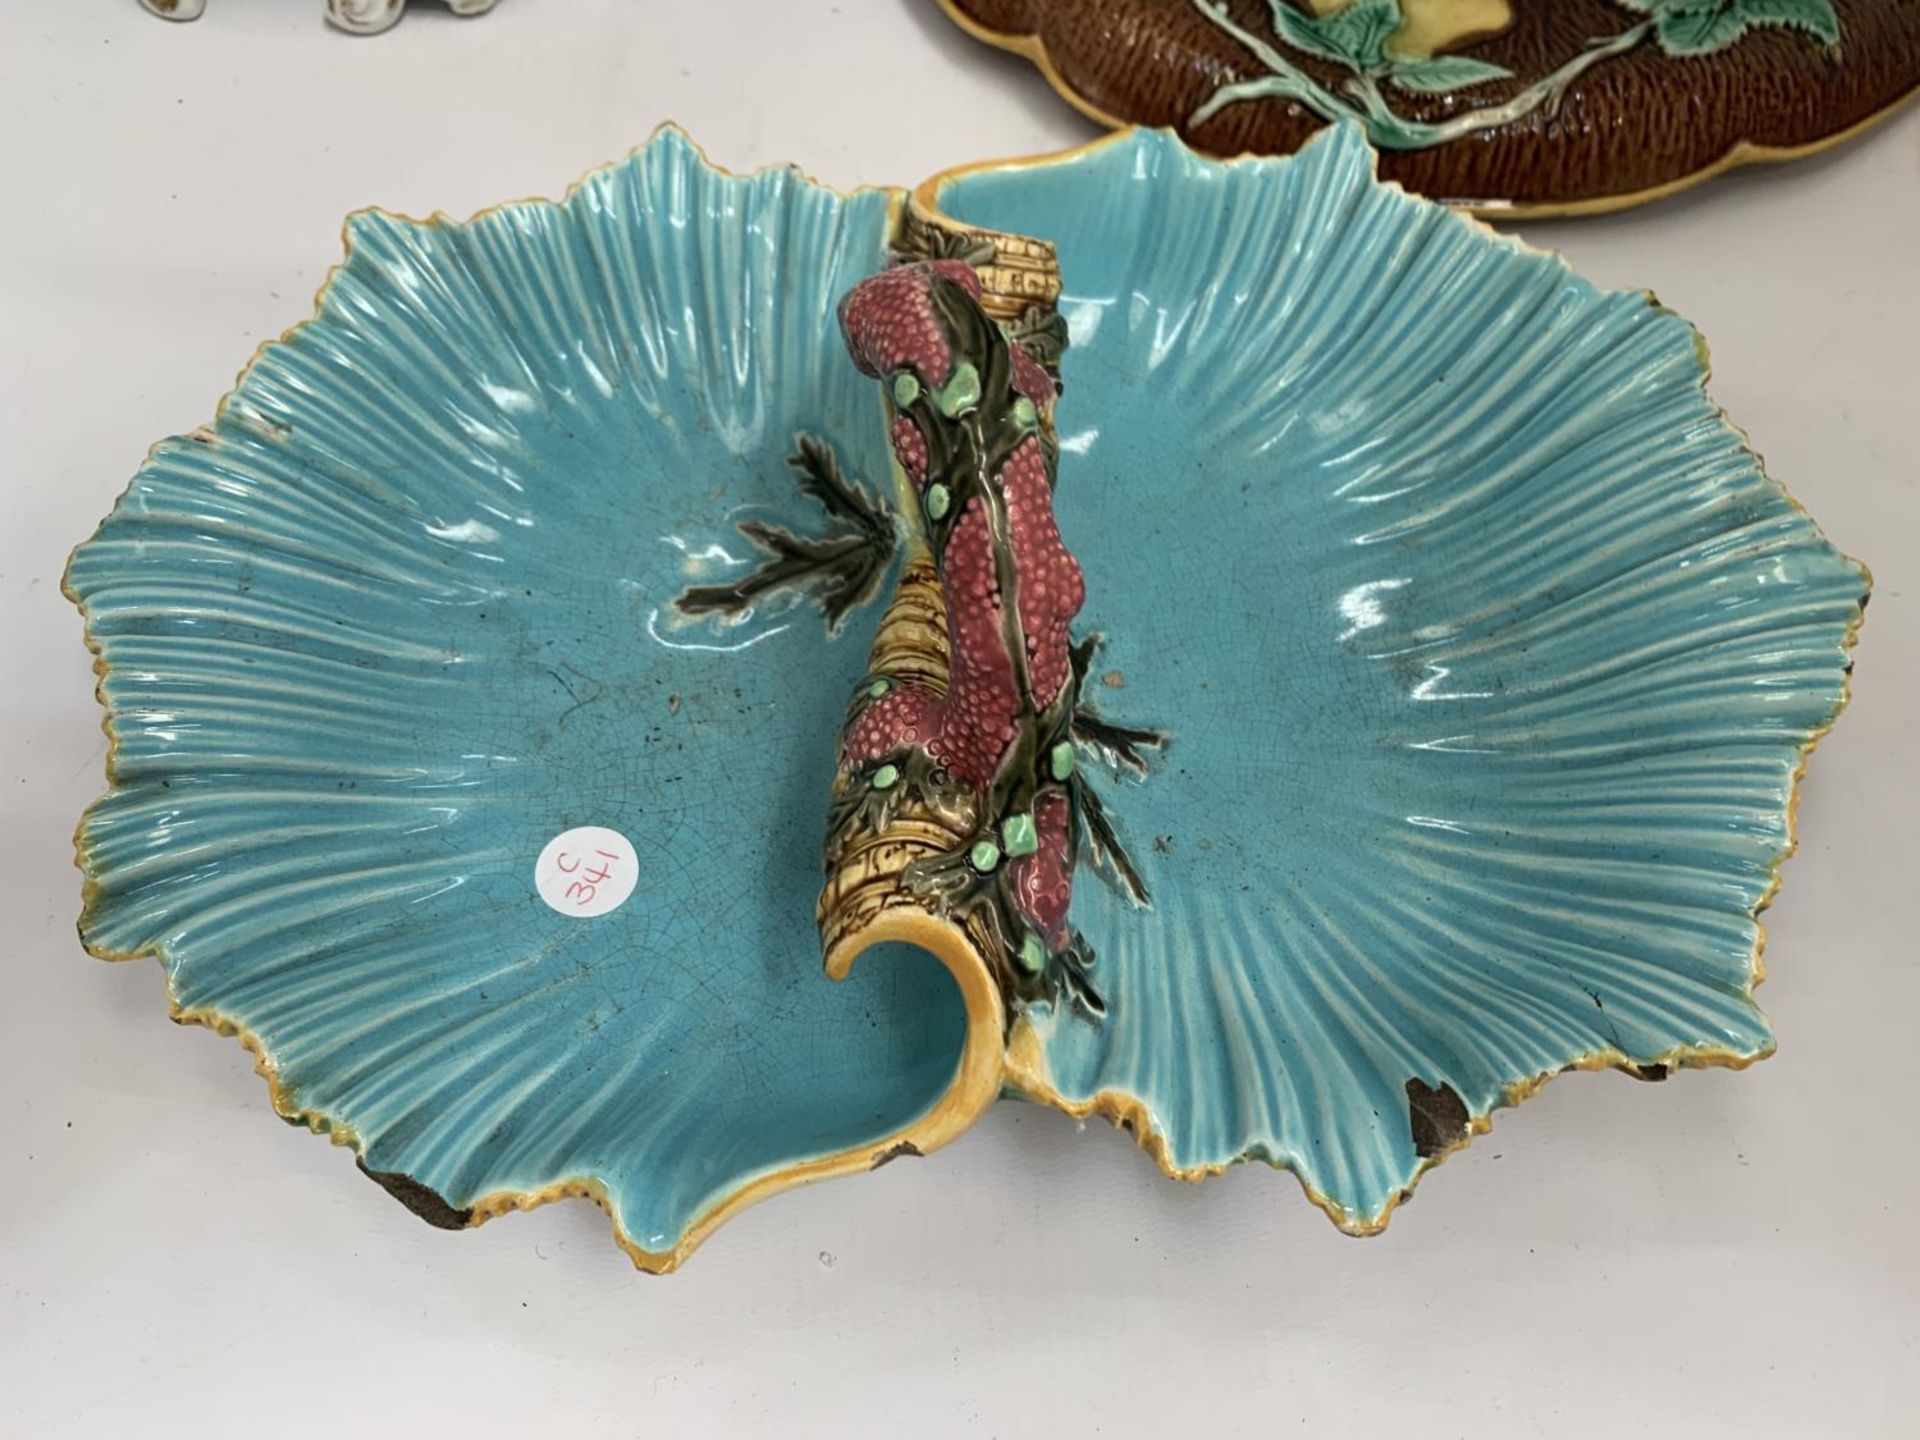 A VINTAGE MAJOLICA BOWL WITH HANDLE, MAJOLICA FRUIT PLATTER AND A VICTORIAN VASE - Image 2 of 6